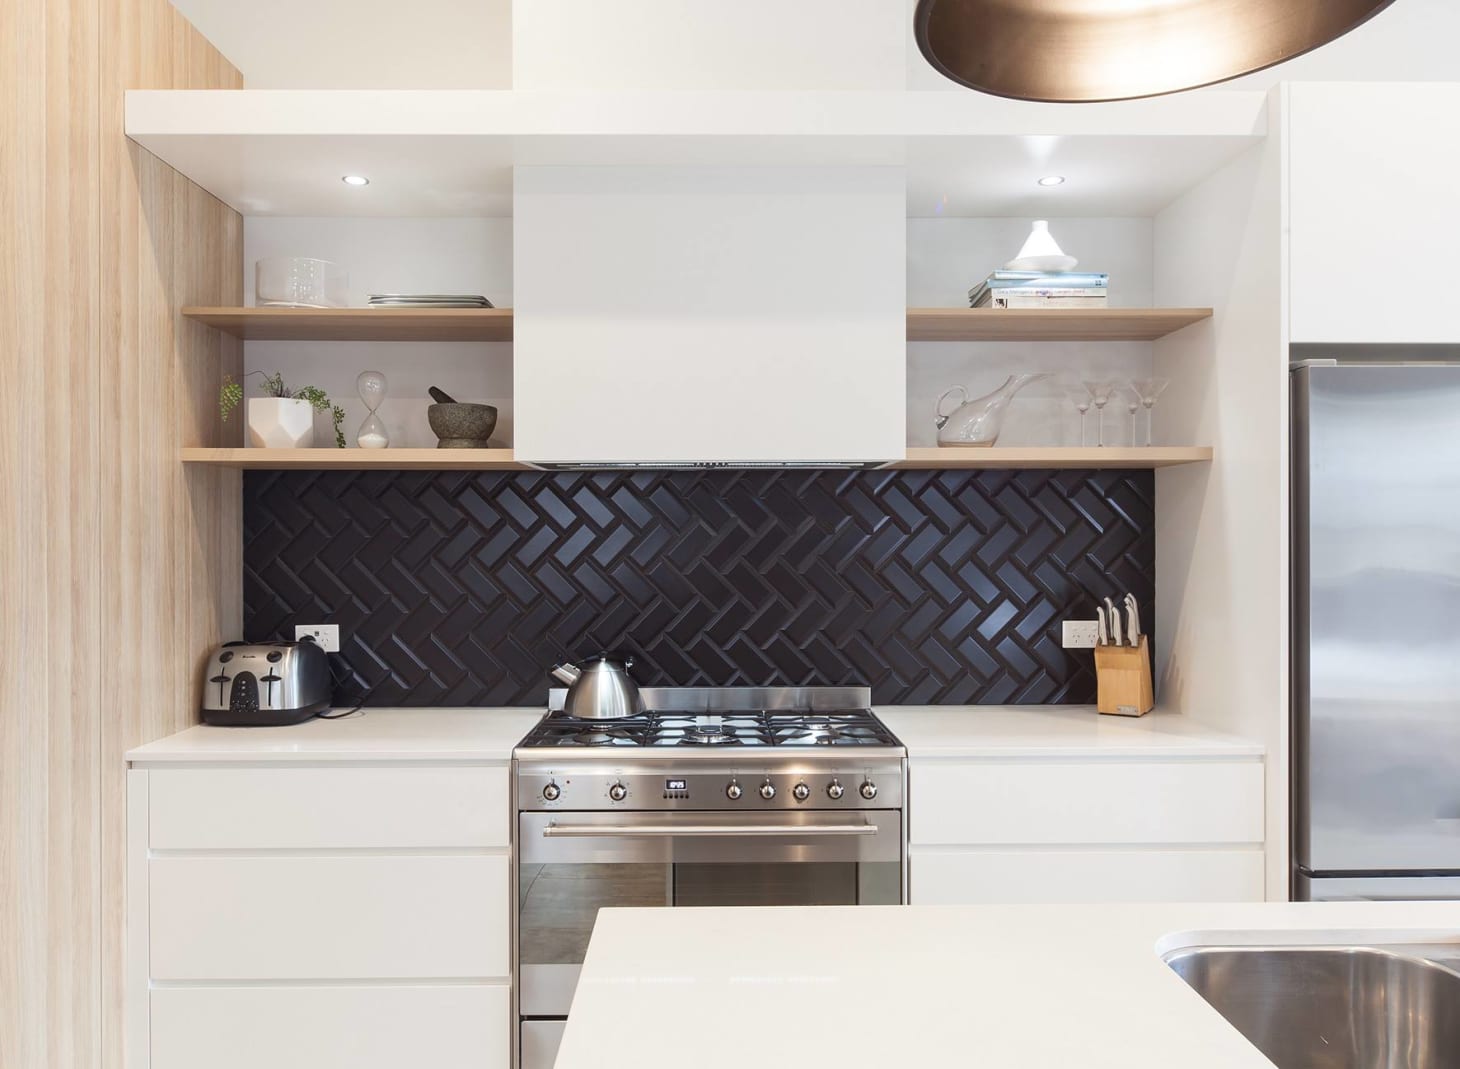 Kitchen Trend We Love: Black Tiles with Black Grout | Apartment Therapy